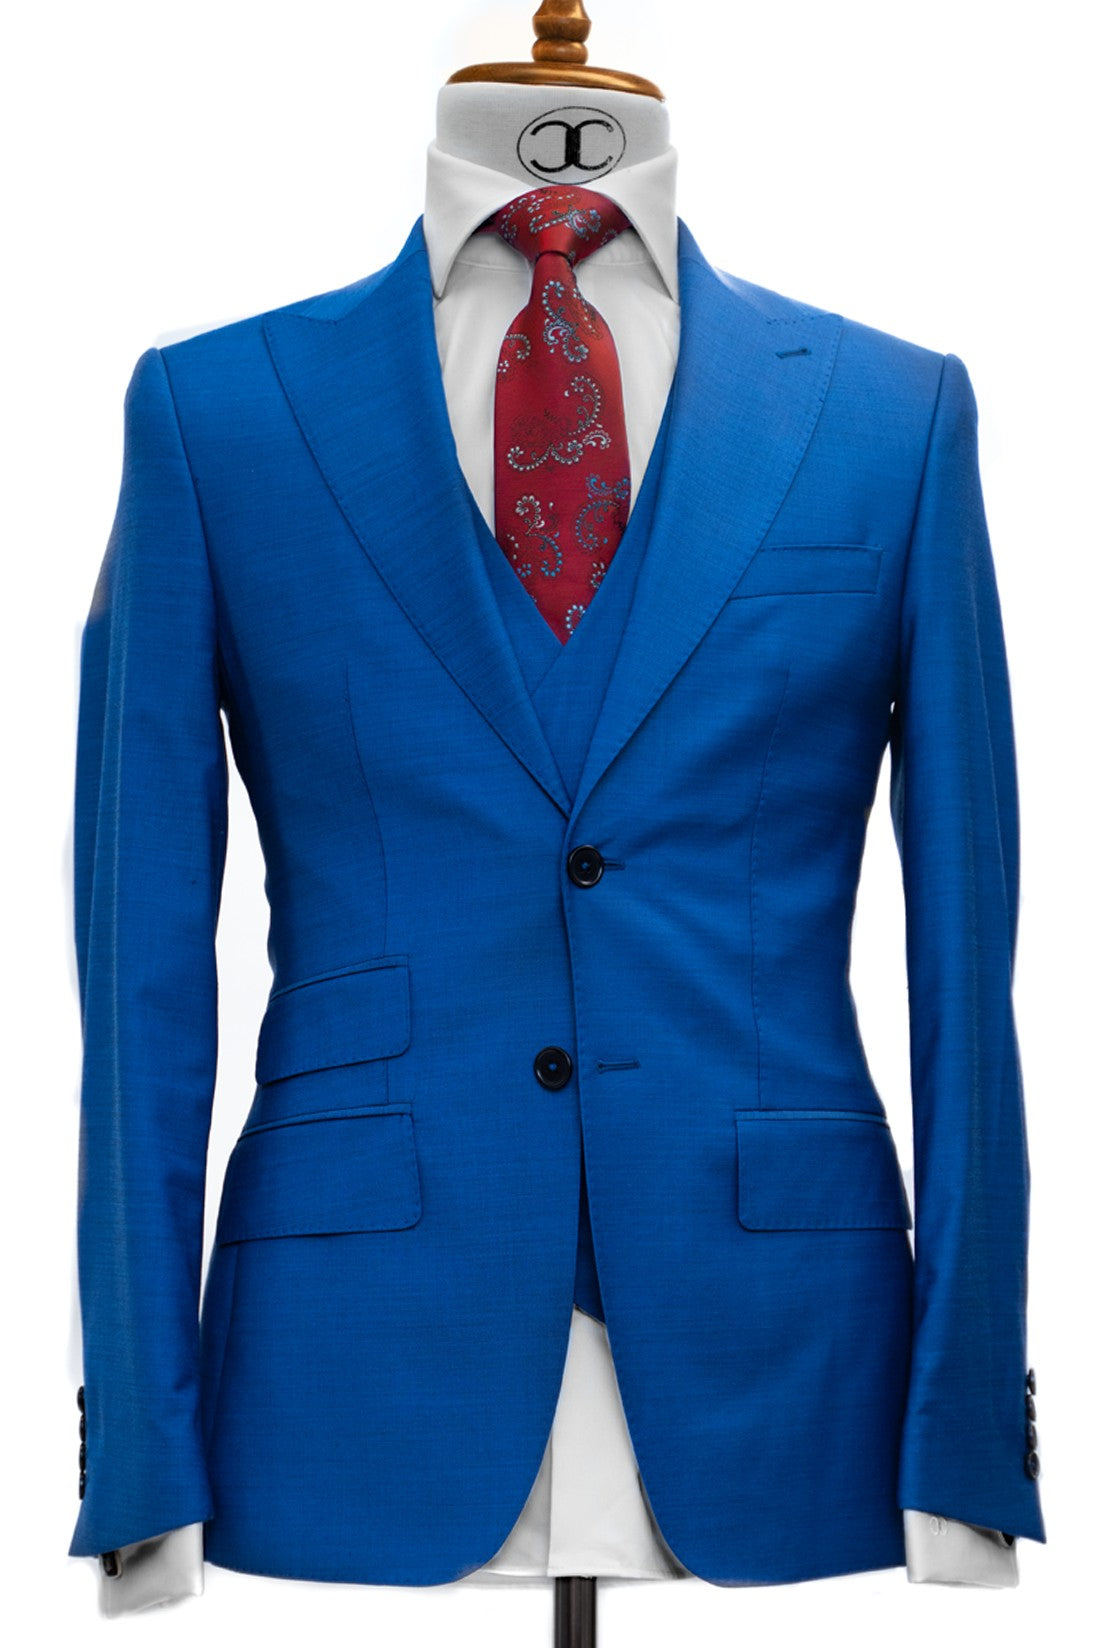 Lanificio Mario Filafil - Royal Blue 3-piece slim fit suit with double breasted V vest.